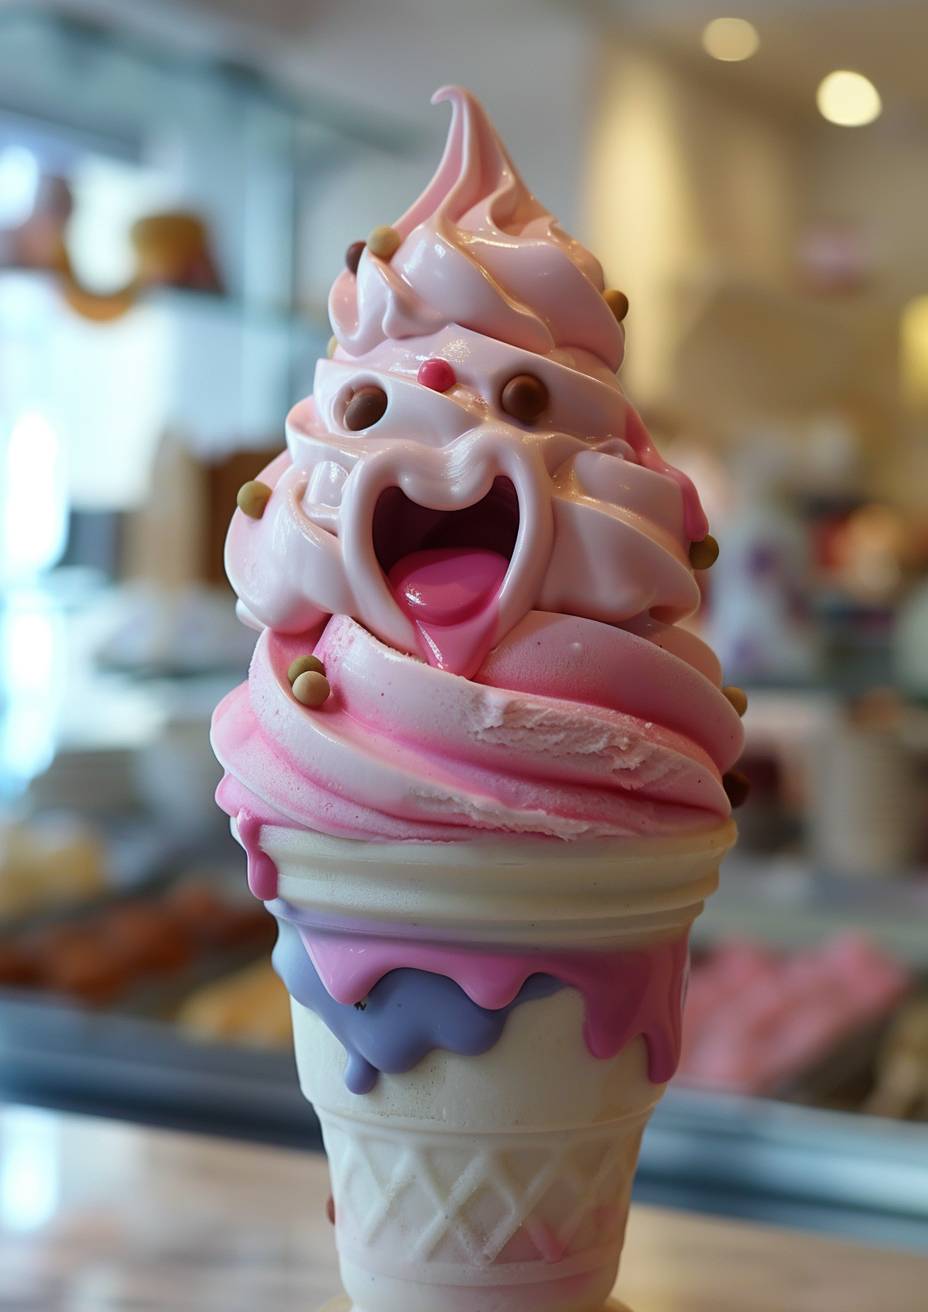 A soft ice cream with a smiley face